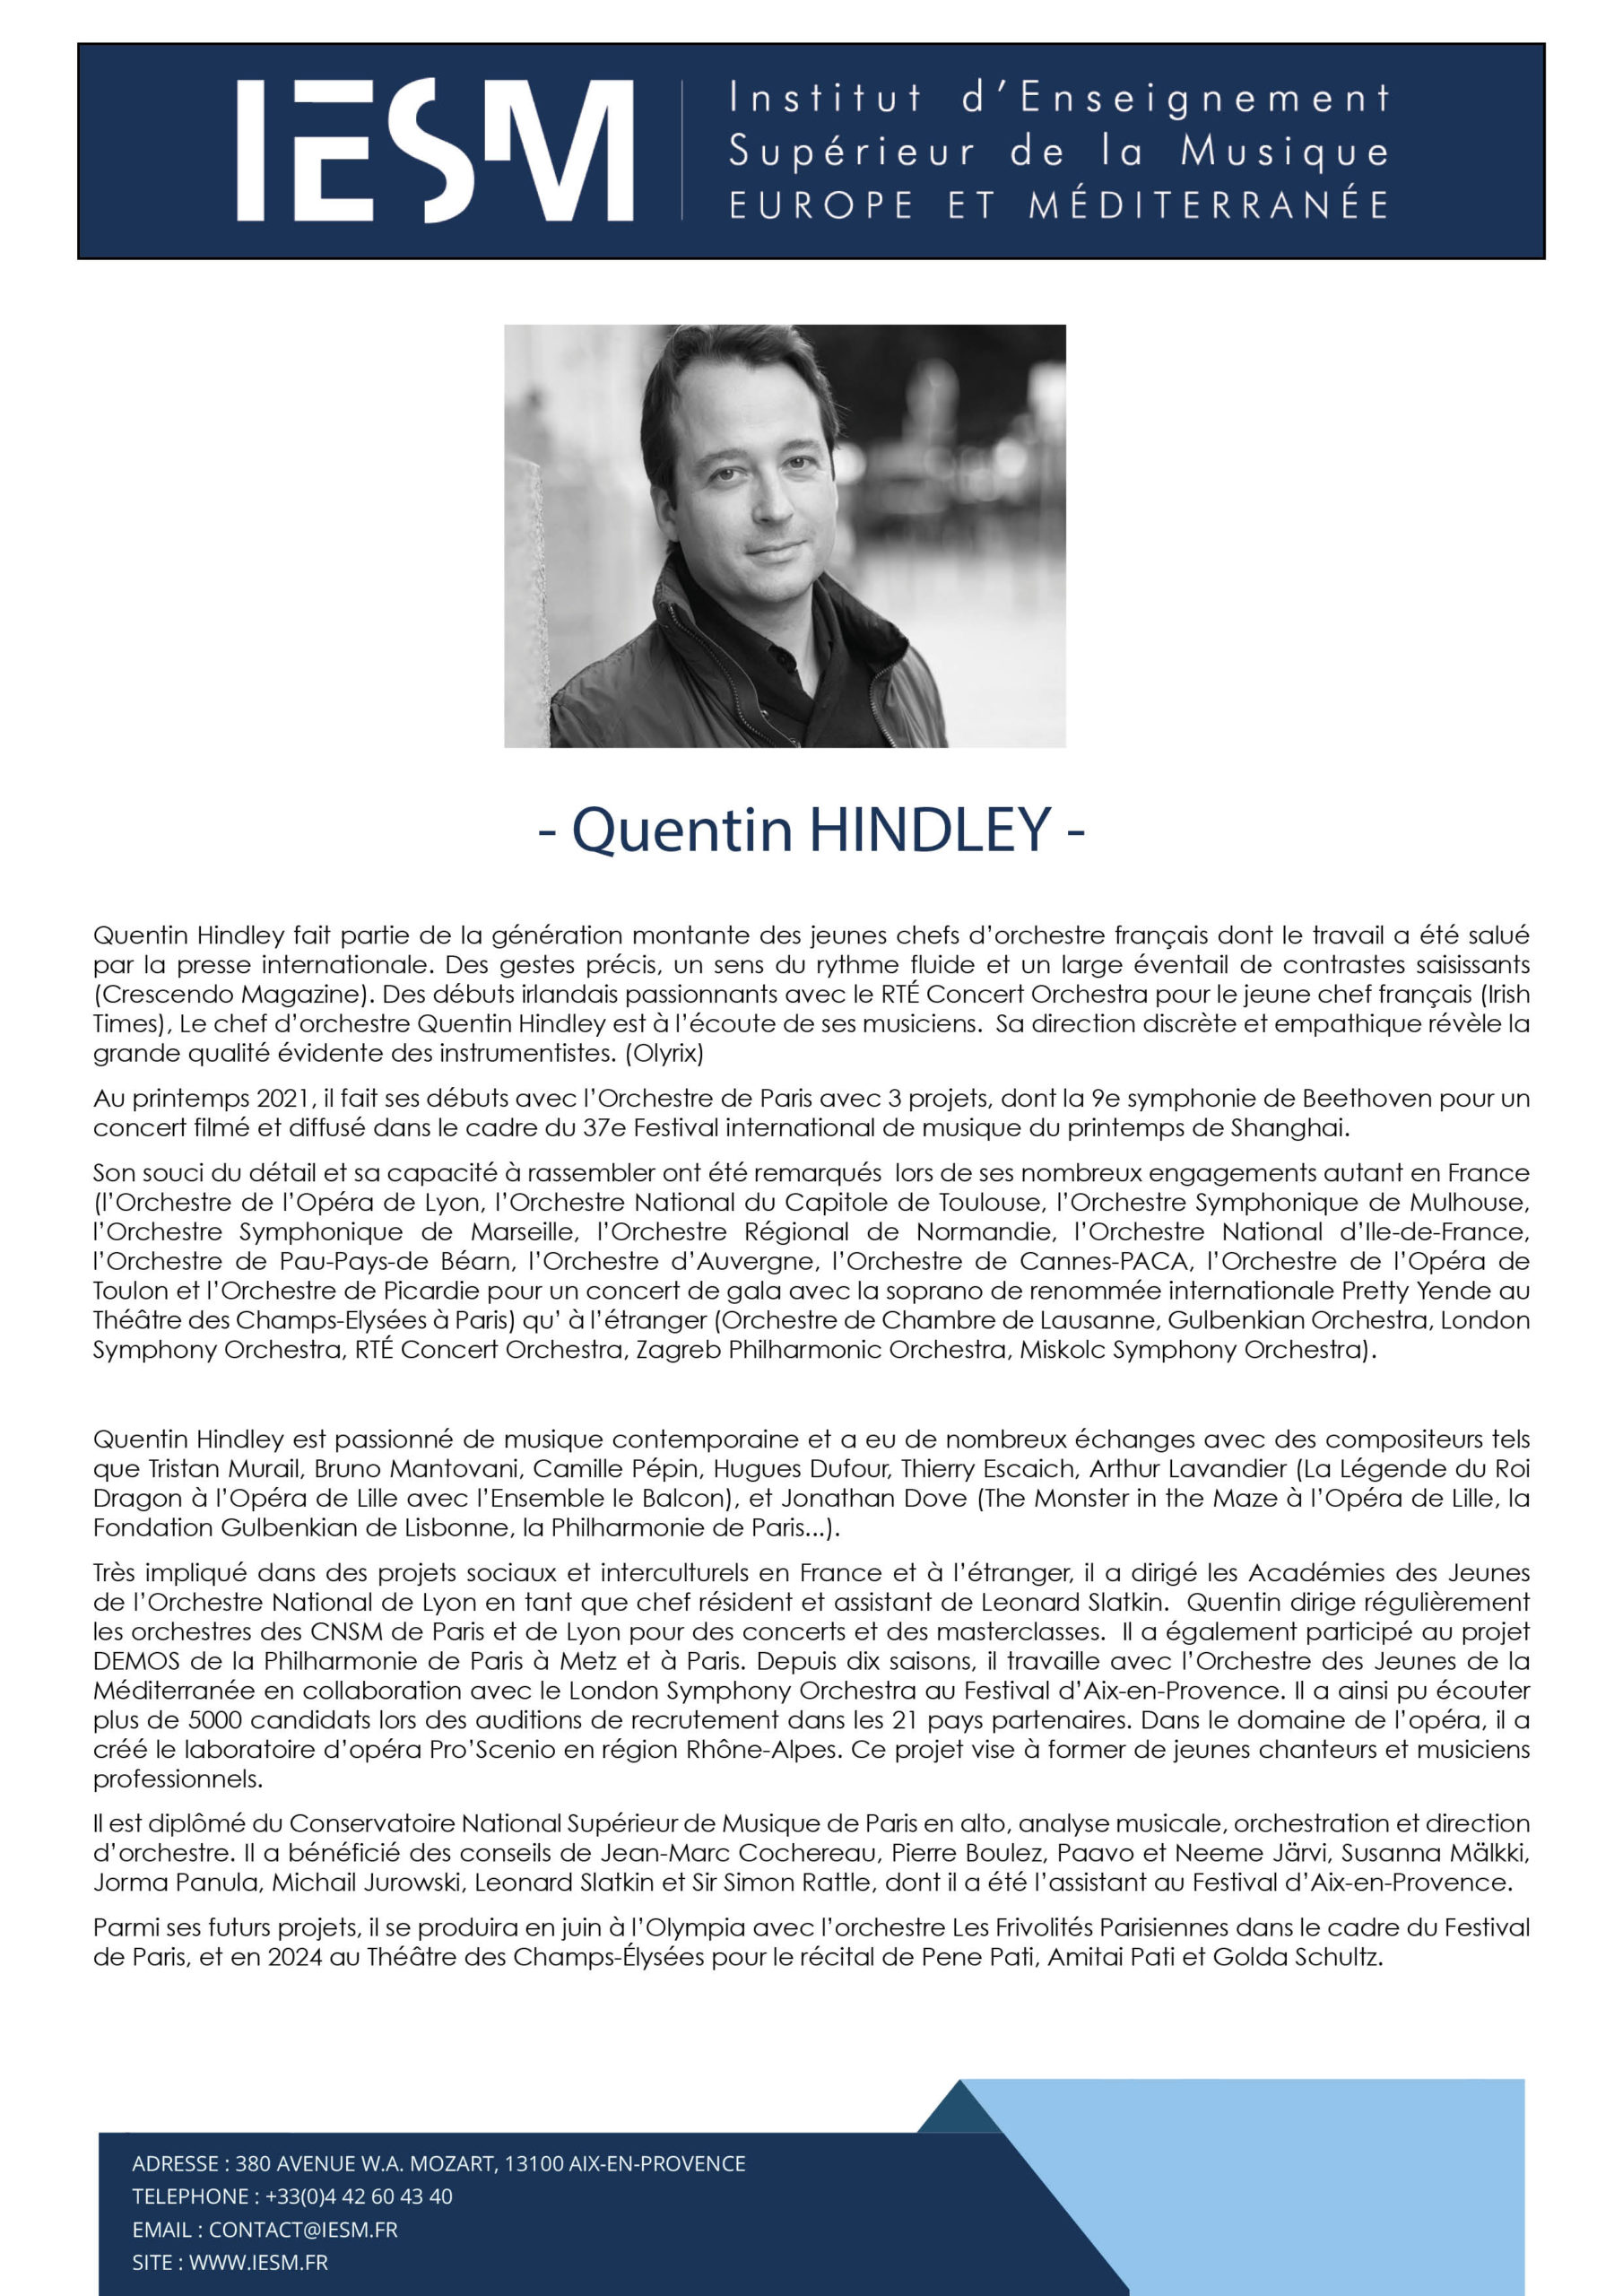 Bio HINDLEY Quentin scaled